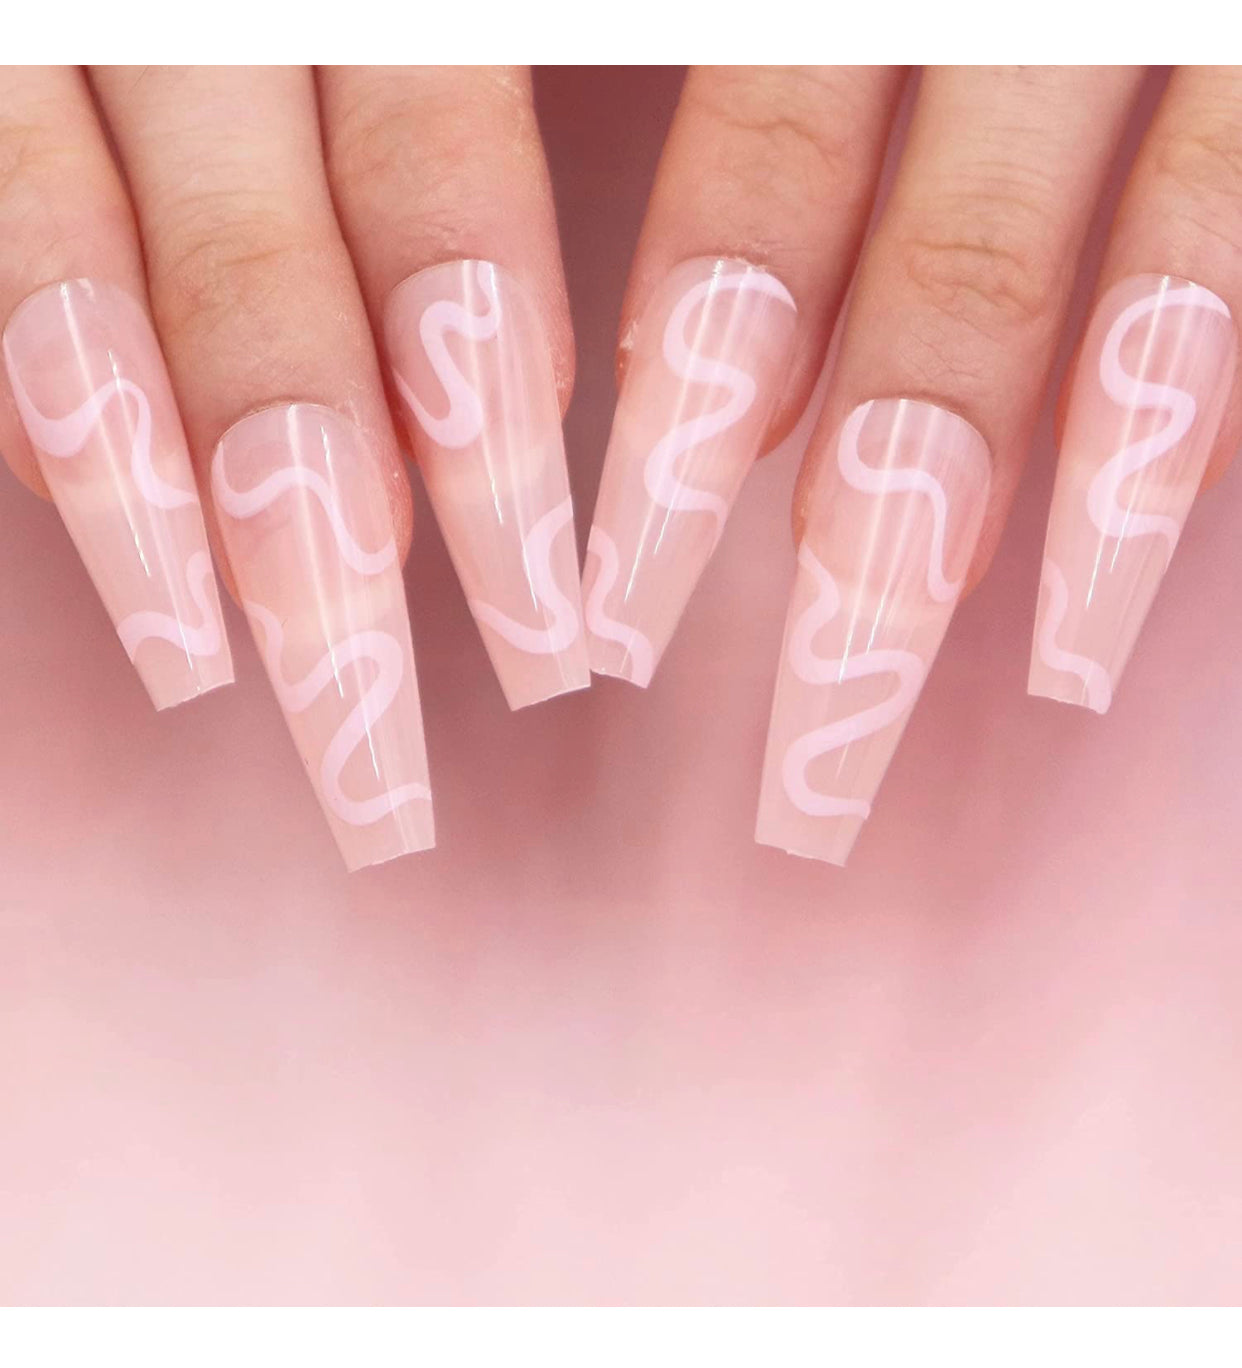 Love or Hate? the Nail Trends That Divided Opinion ...